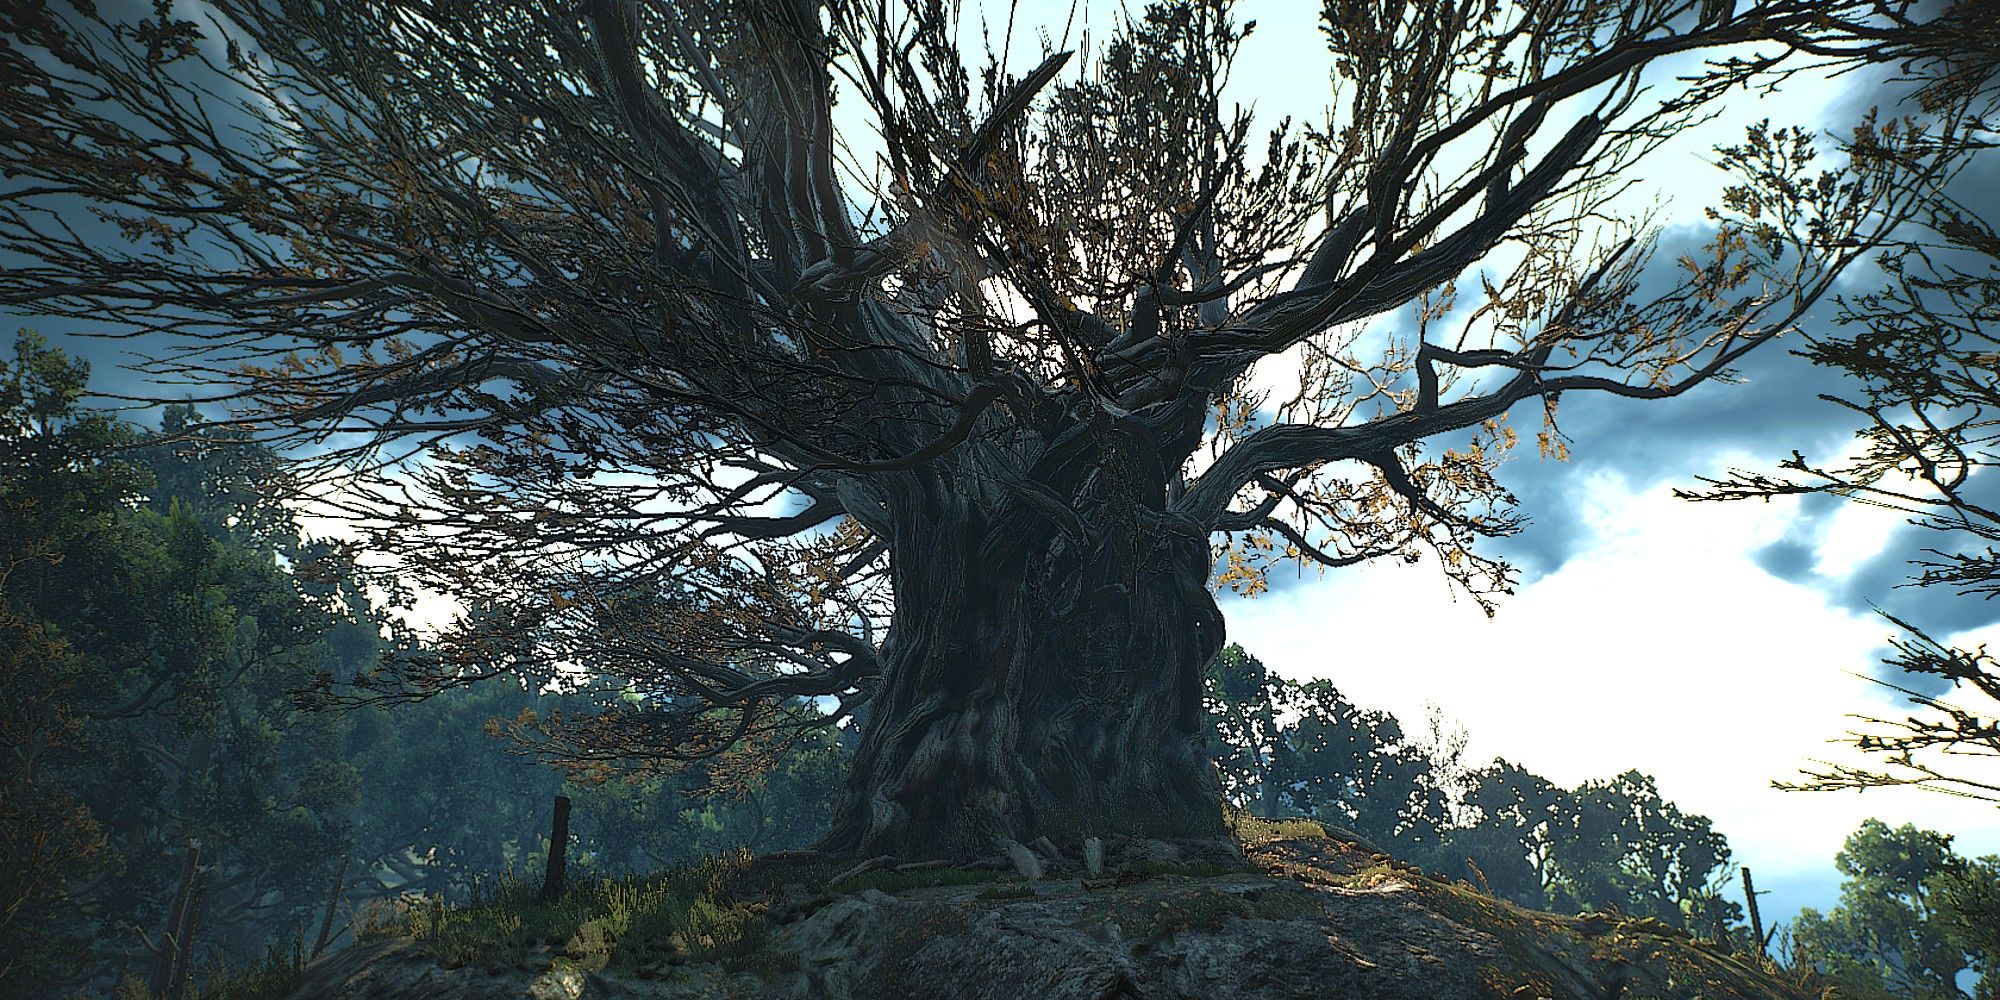 Iconic Historic Trees In Poland Now Officially Named After The Witcher Characters